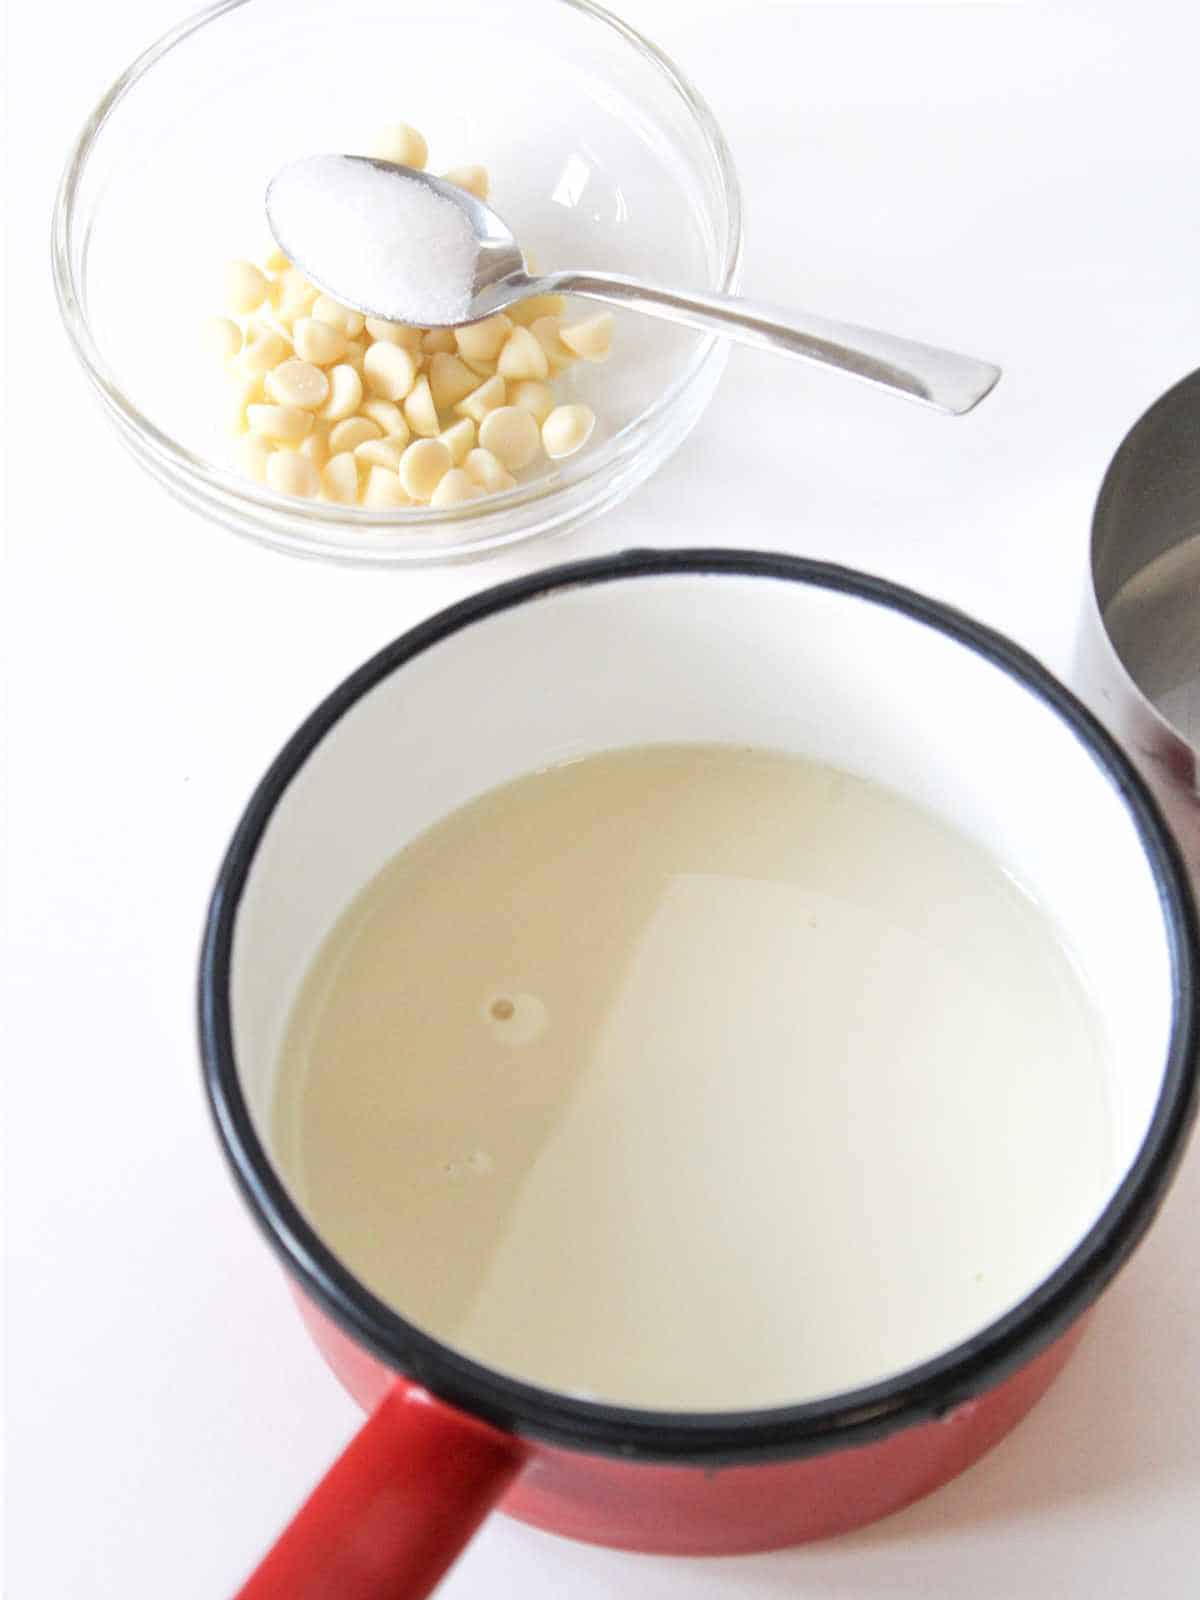 Hot milk in a sauce pan with white chocolate chips in a bowl nearby.